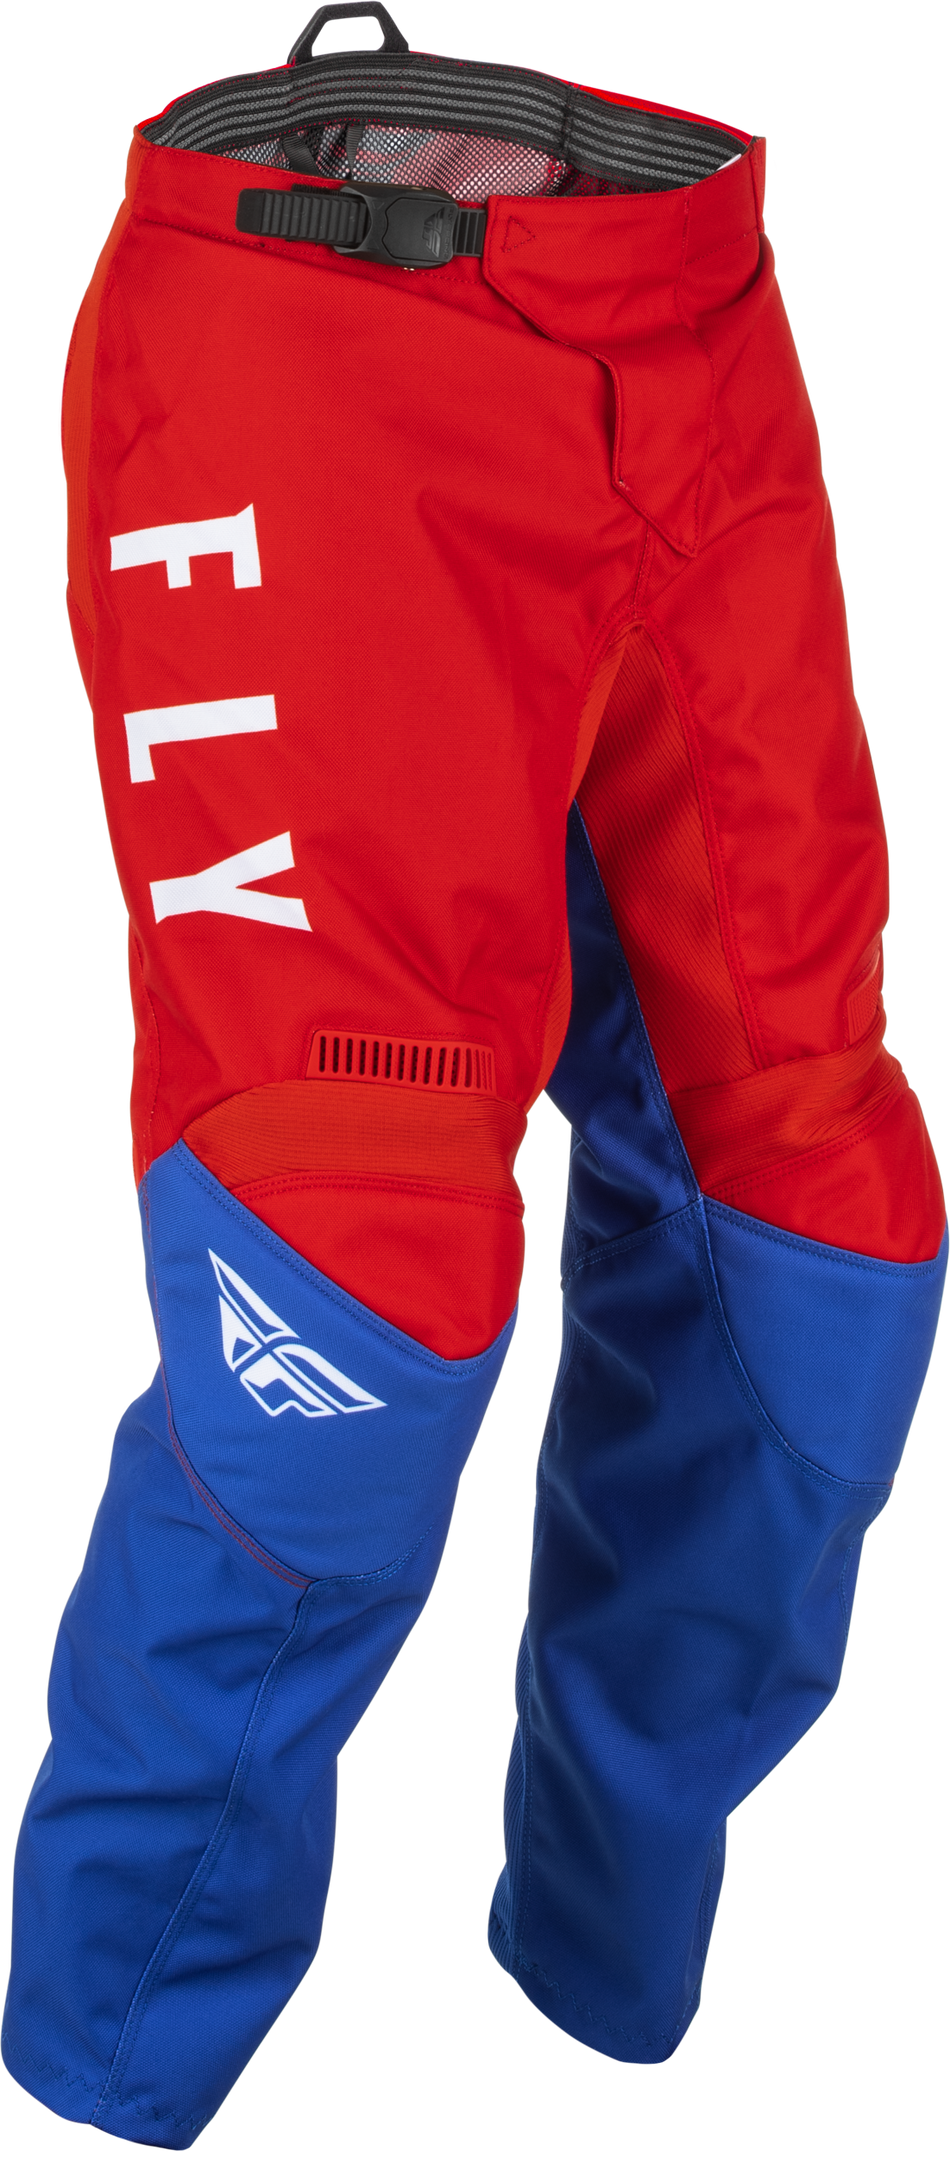 FLY RACING Youth F-16 Pants Red/White/Blue Sz 18 375-93418